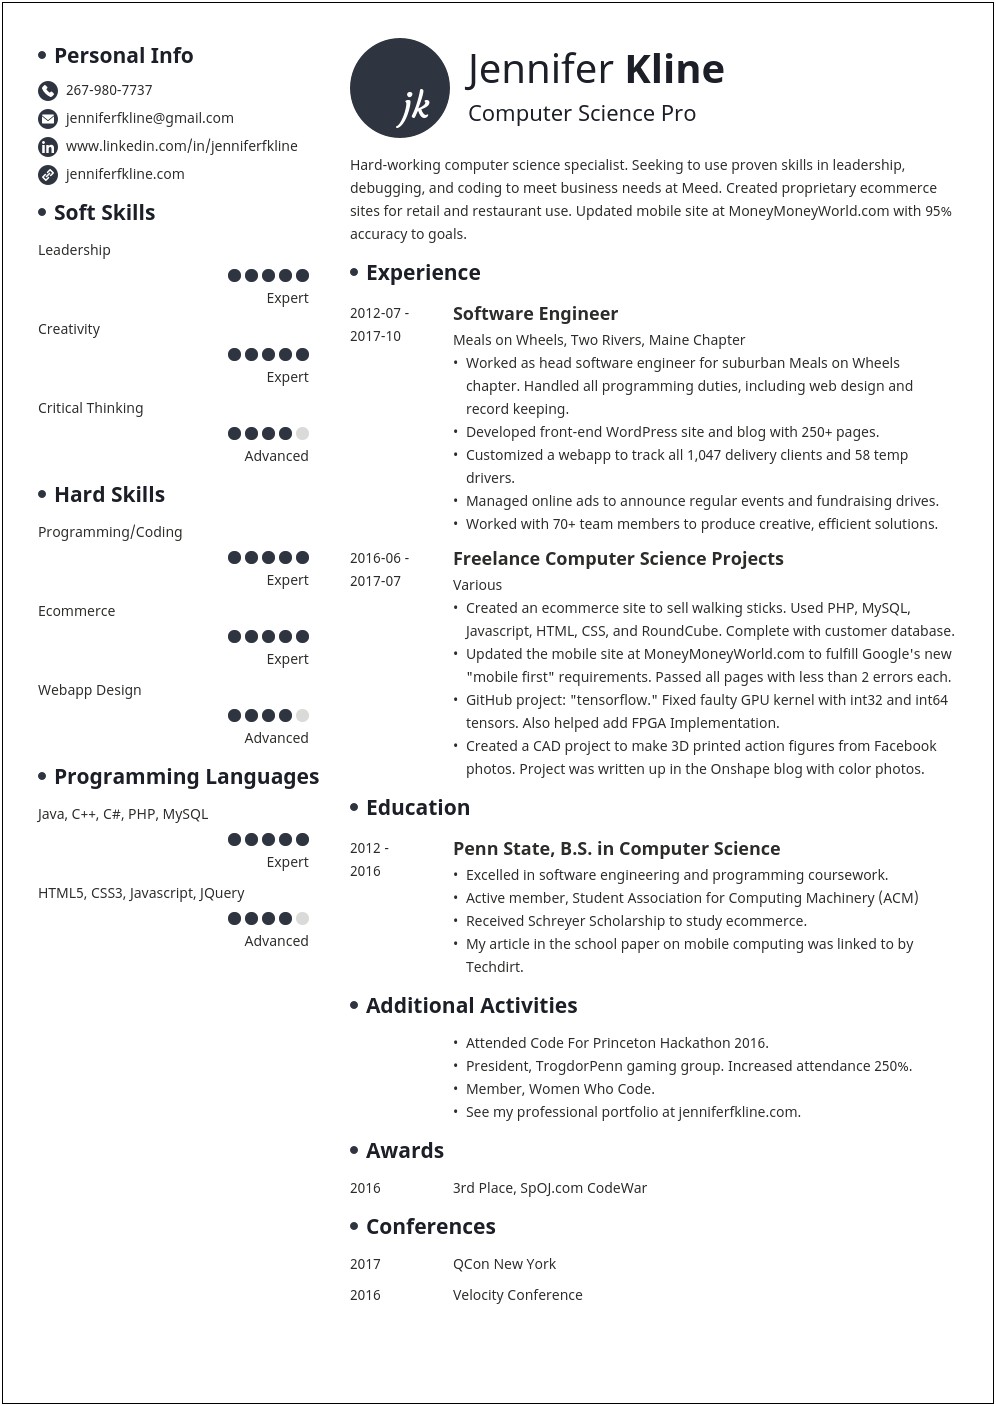 Where To Put Hackathon Experice In Resume